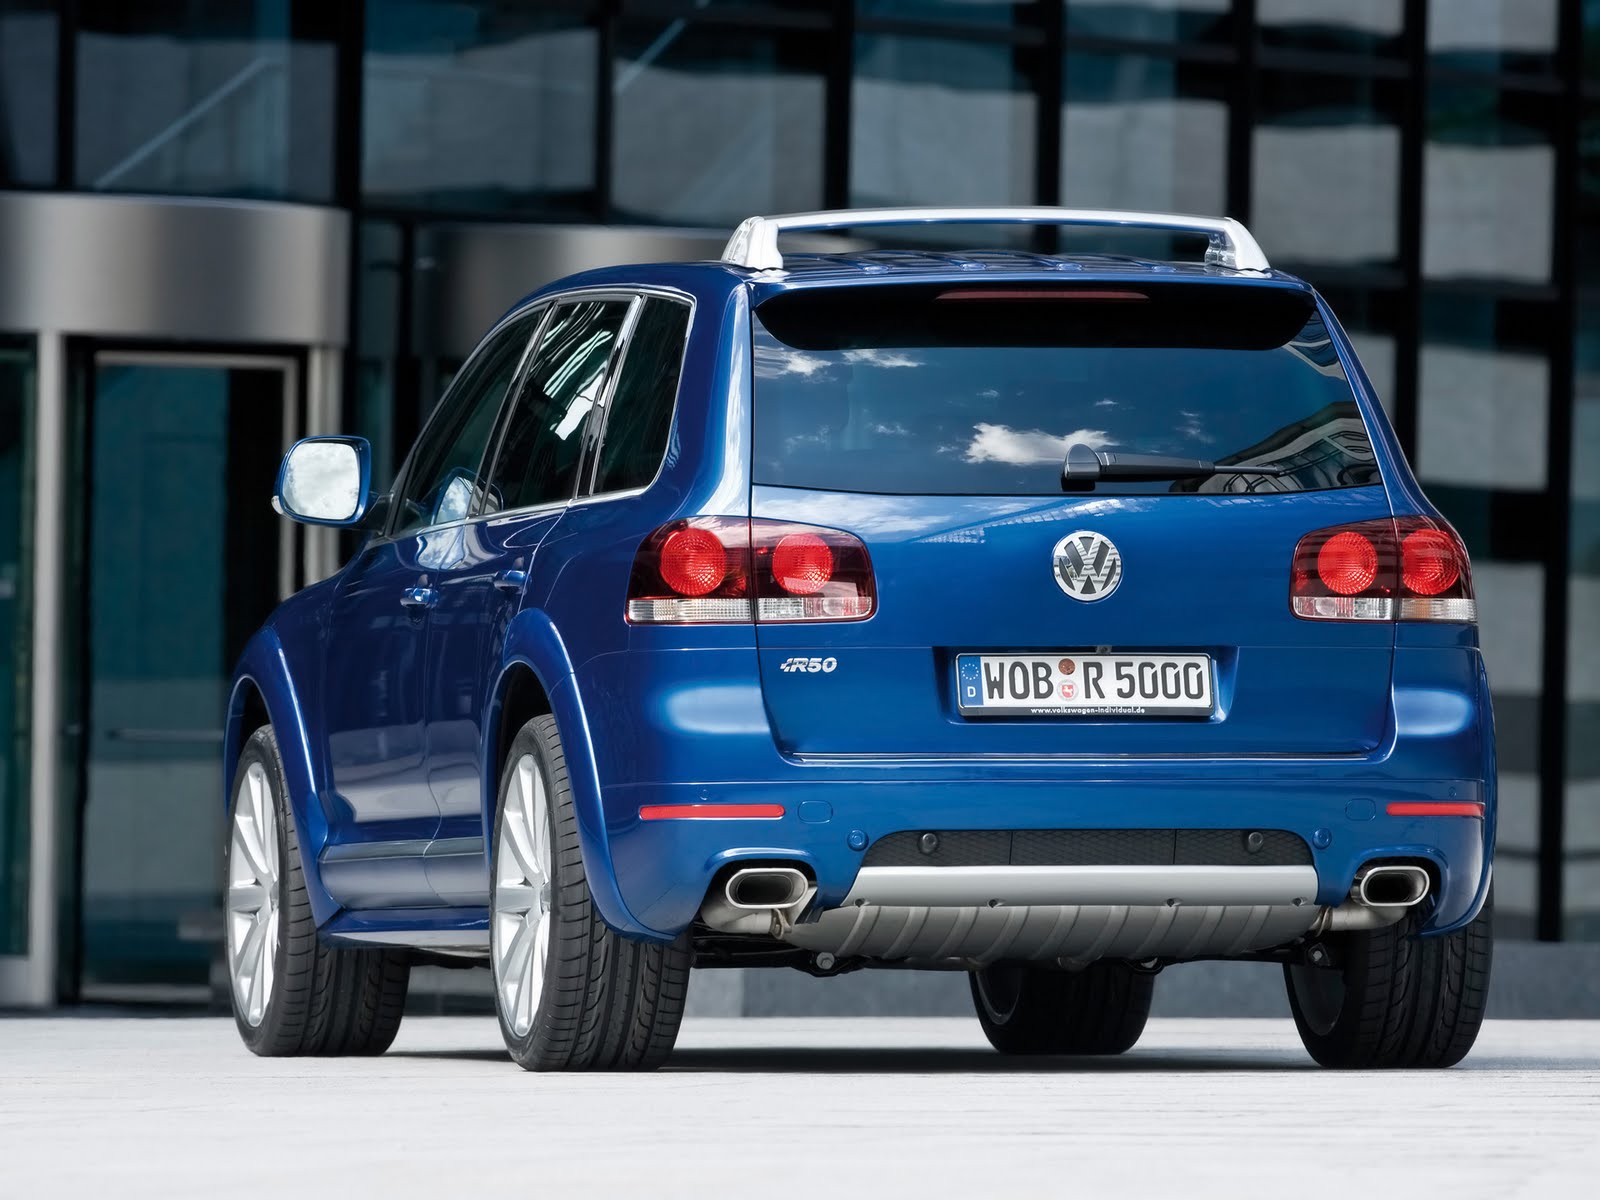 Volkswagen Touareg Pictures   Beautiful Cool Cars Wallpapers